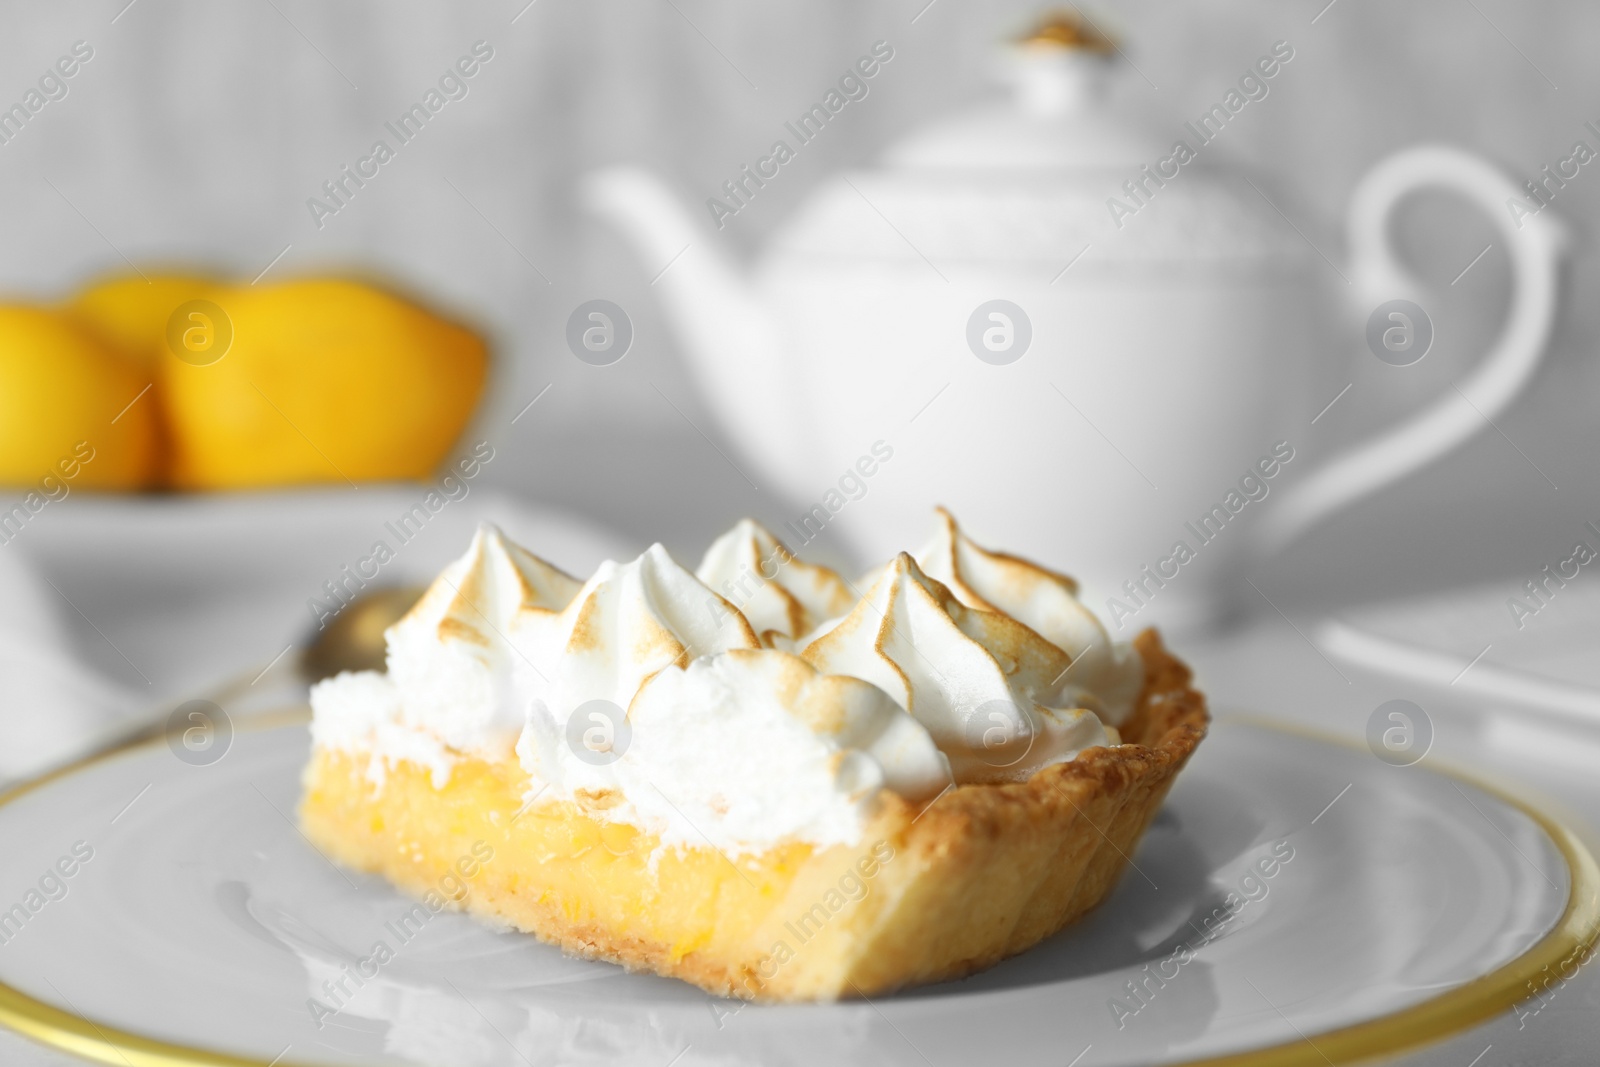 Photo of Plate with piece of delicious lemon meringue pie on white table